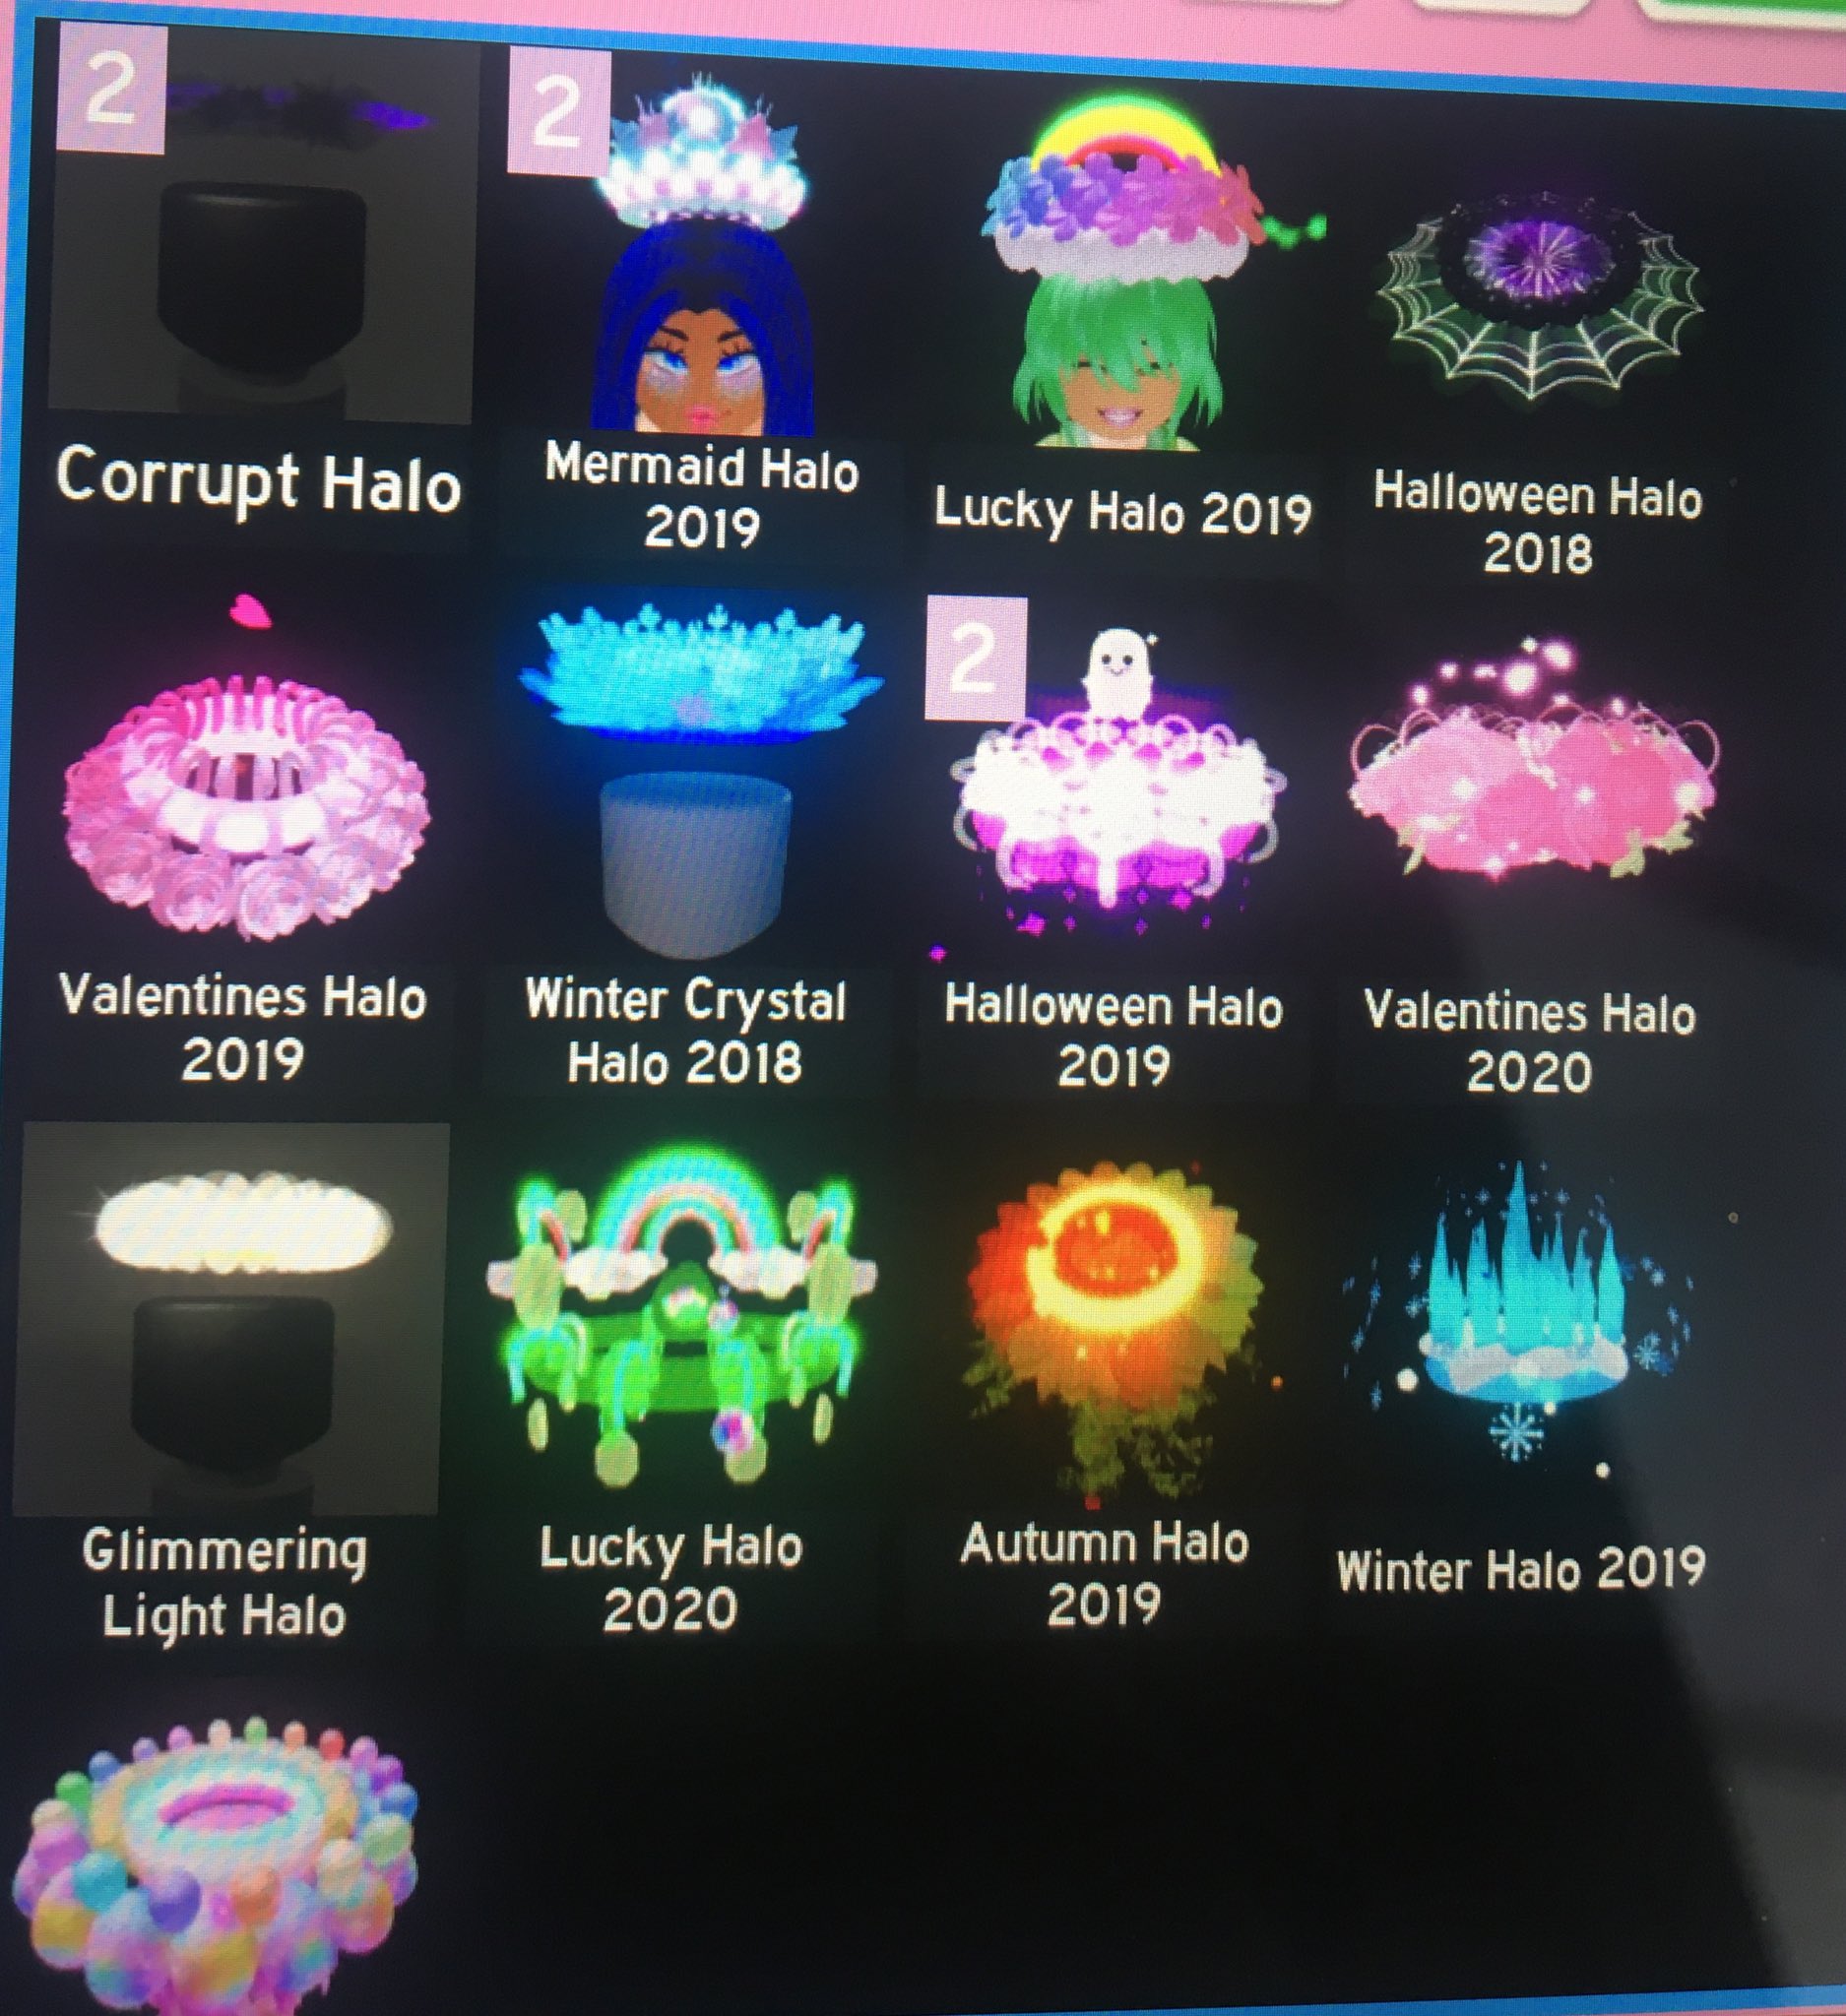 Ceo Of Saying No On Twitter Inventory Update Royalehightrades Royalehightrading Looking To Trade Corrupt Mermaid Some Adds For Vday 2020 Https T Co Z1wmffgt38 - roblox trader cbro at redasv2008redas twitter profile and